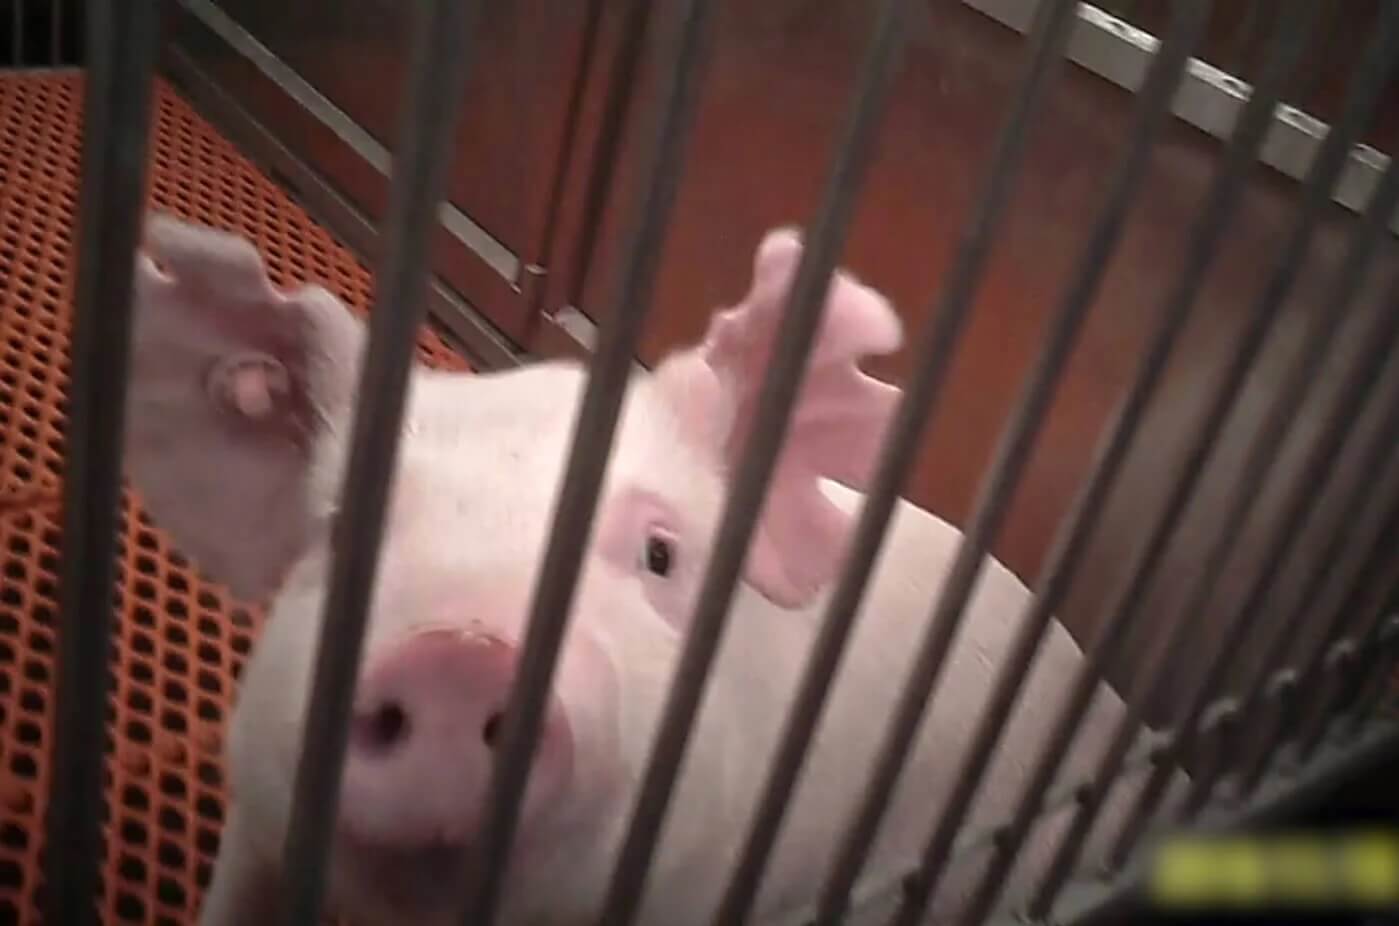 Pig looking at viewer from a barren cage. There are multiple notches in their ears.